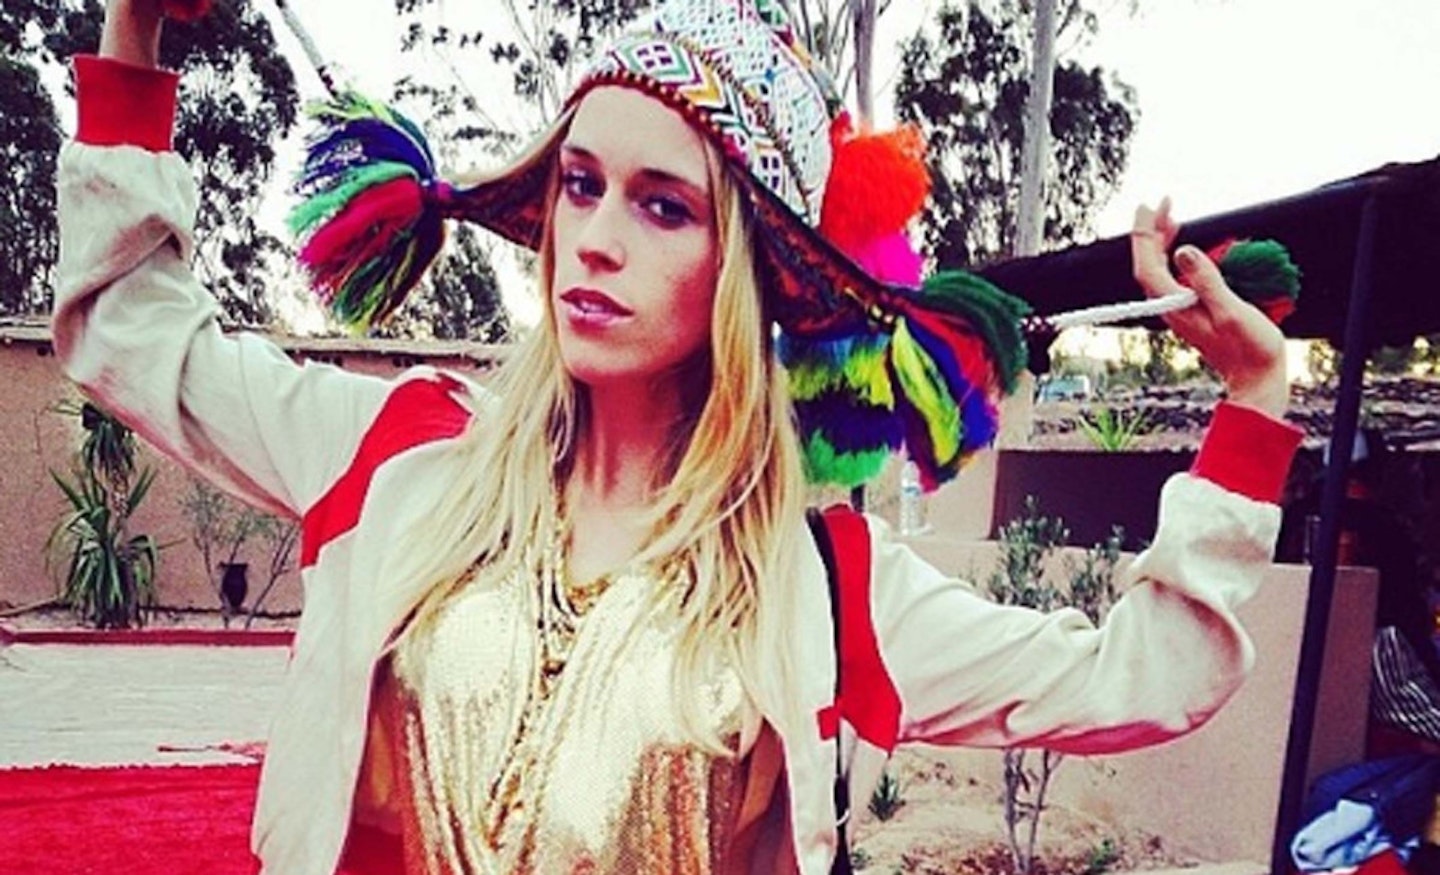 @marycharteris- Best party_wedding I have ever been to in my life @poppydelevingne @cook_james . Desert RAVE!!!